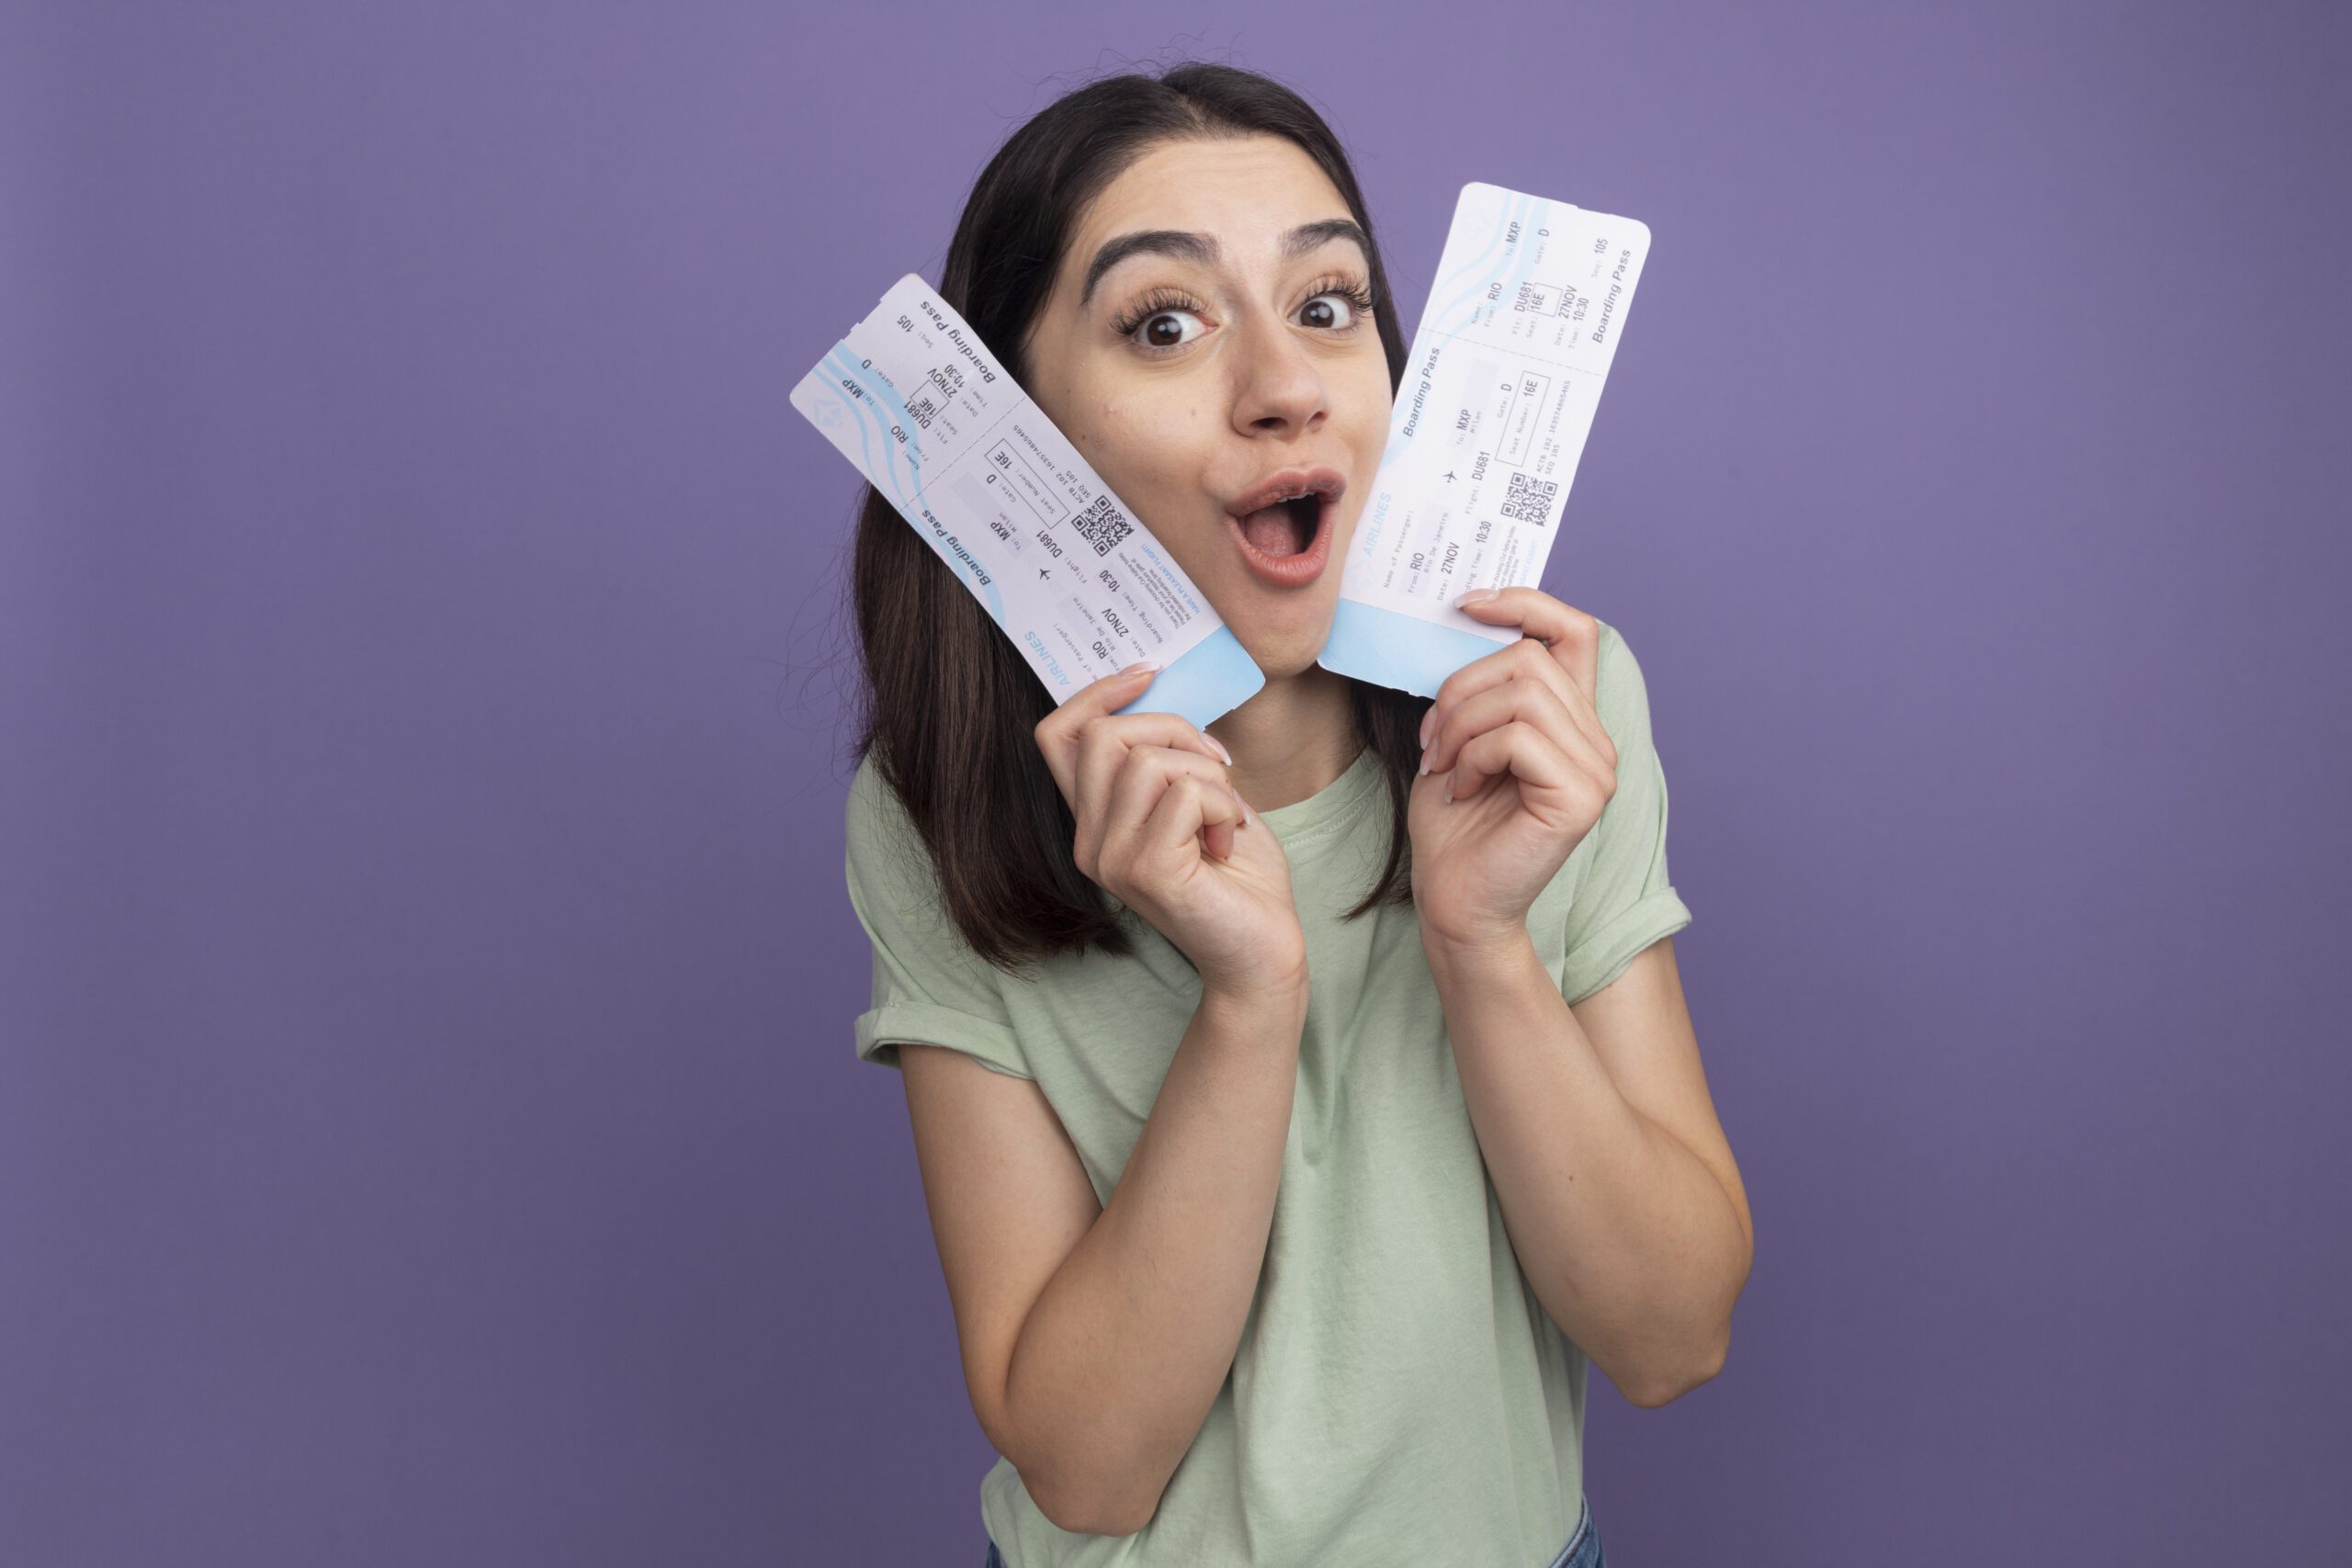 Smiling woman holding two tickets in hand